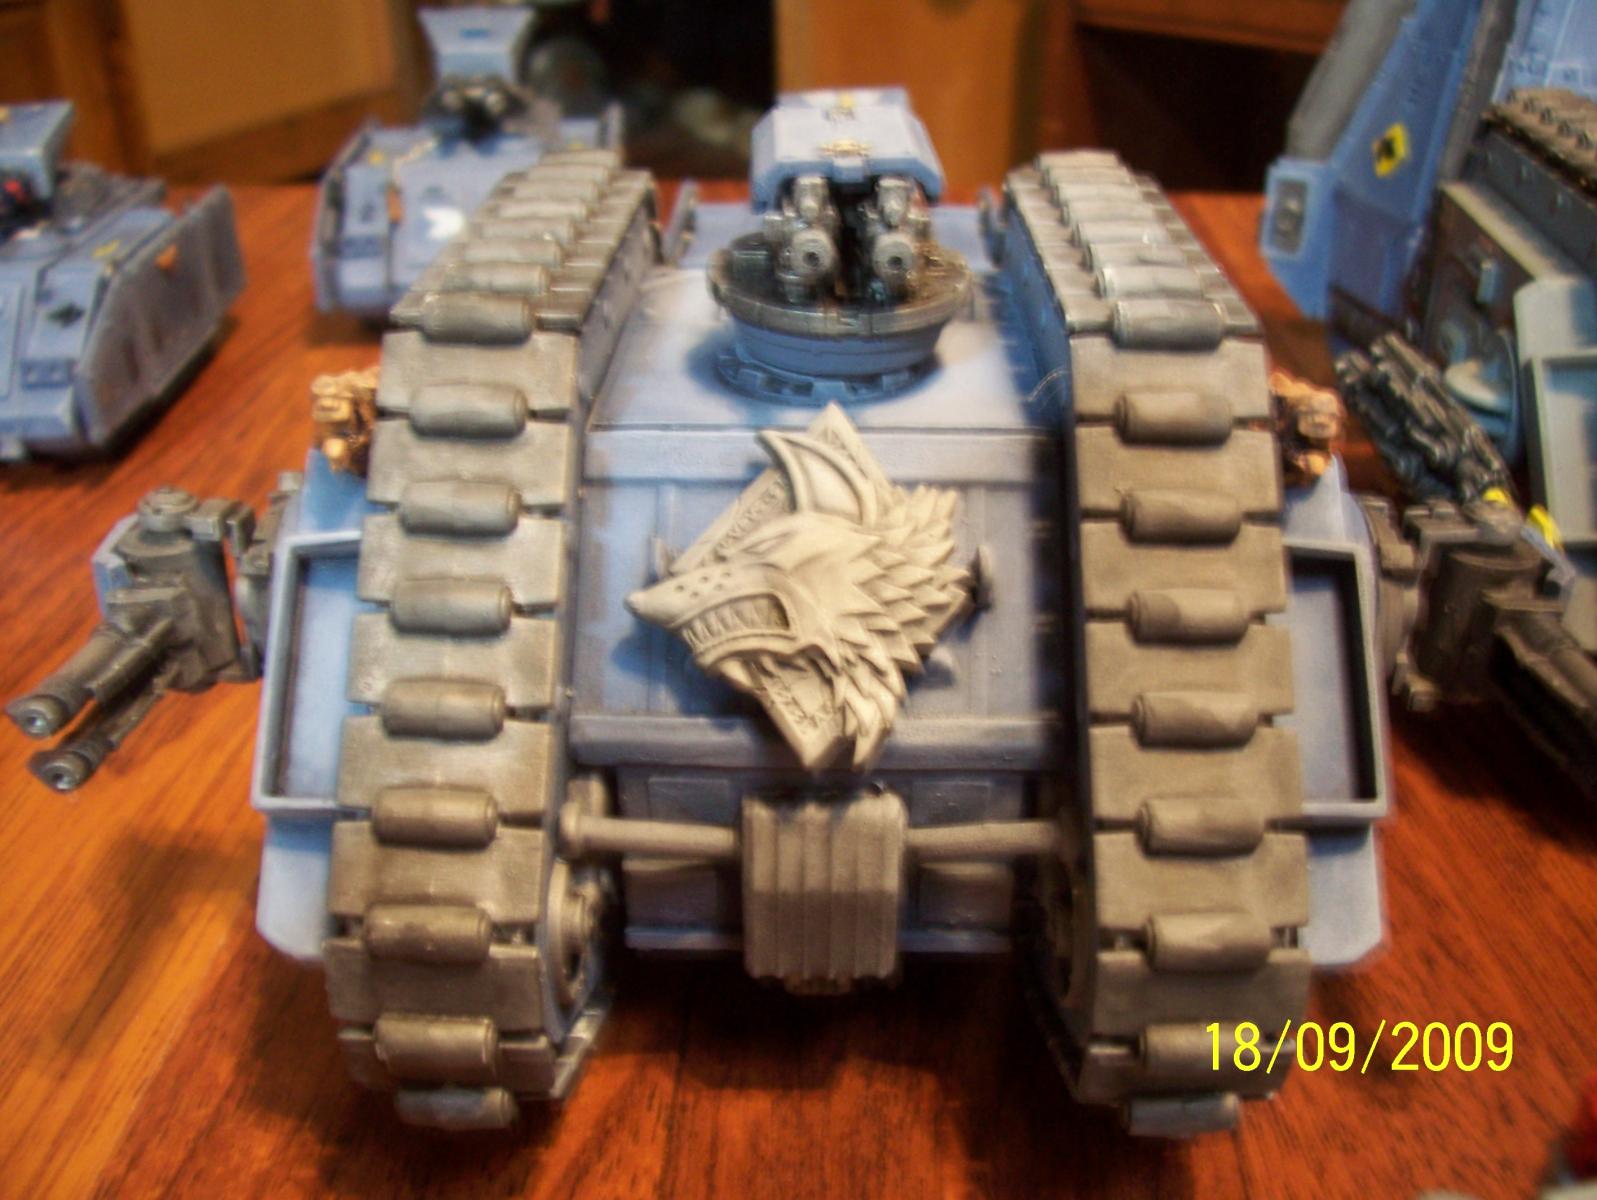 Brian's space wolves